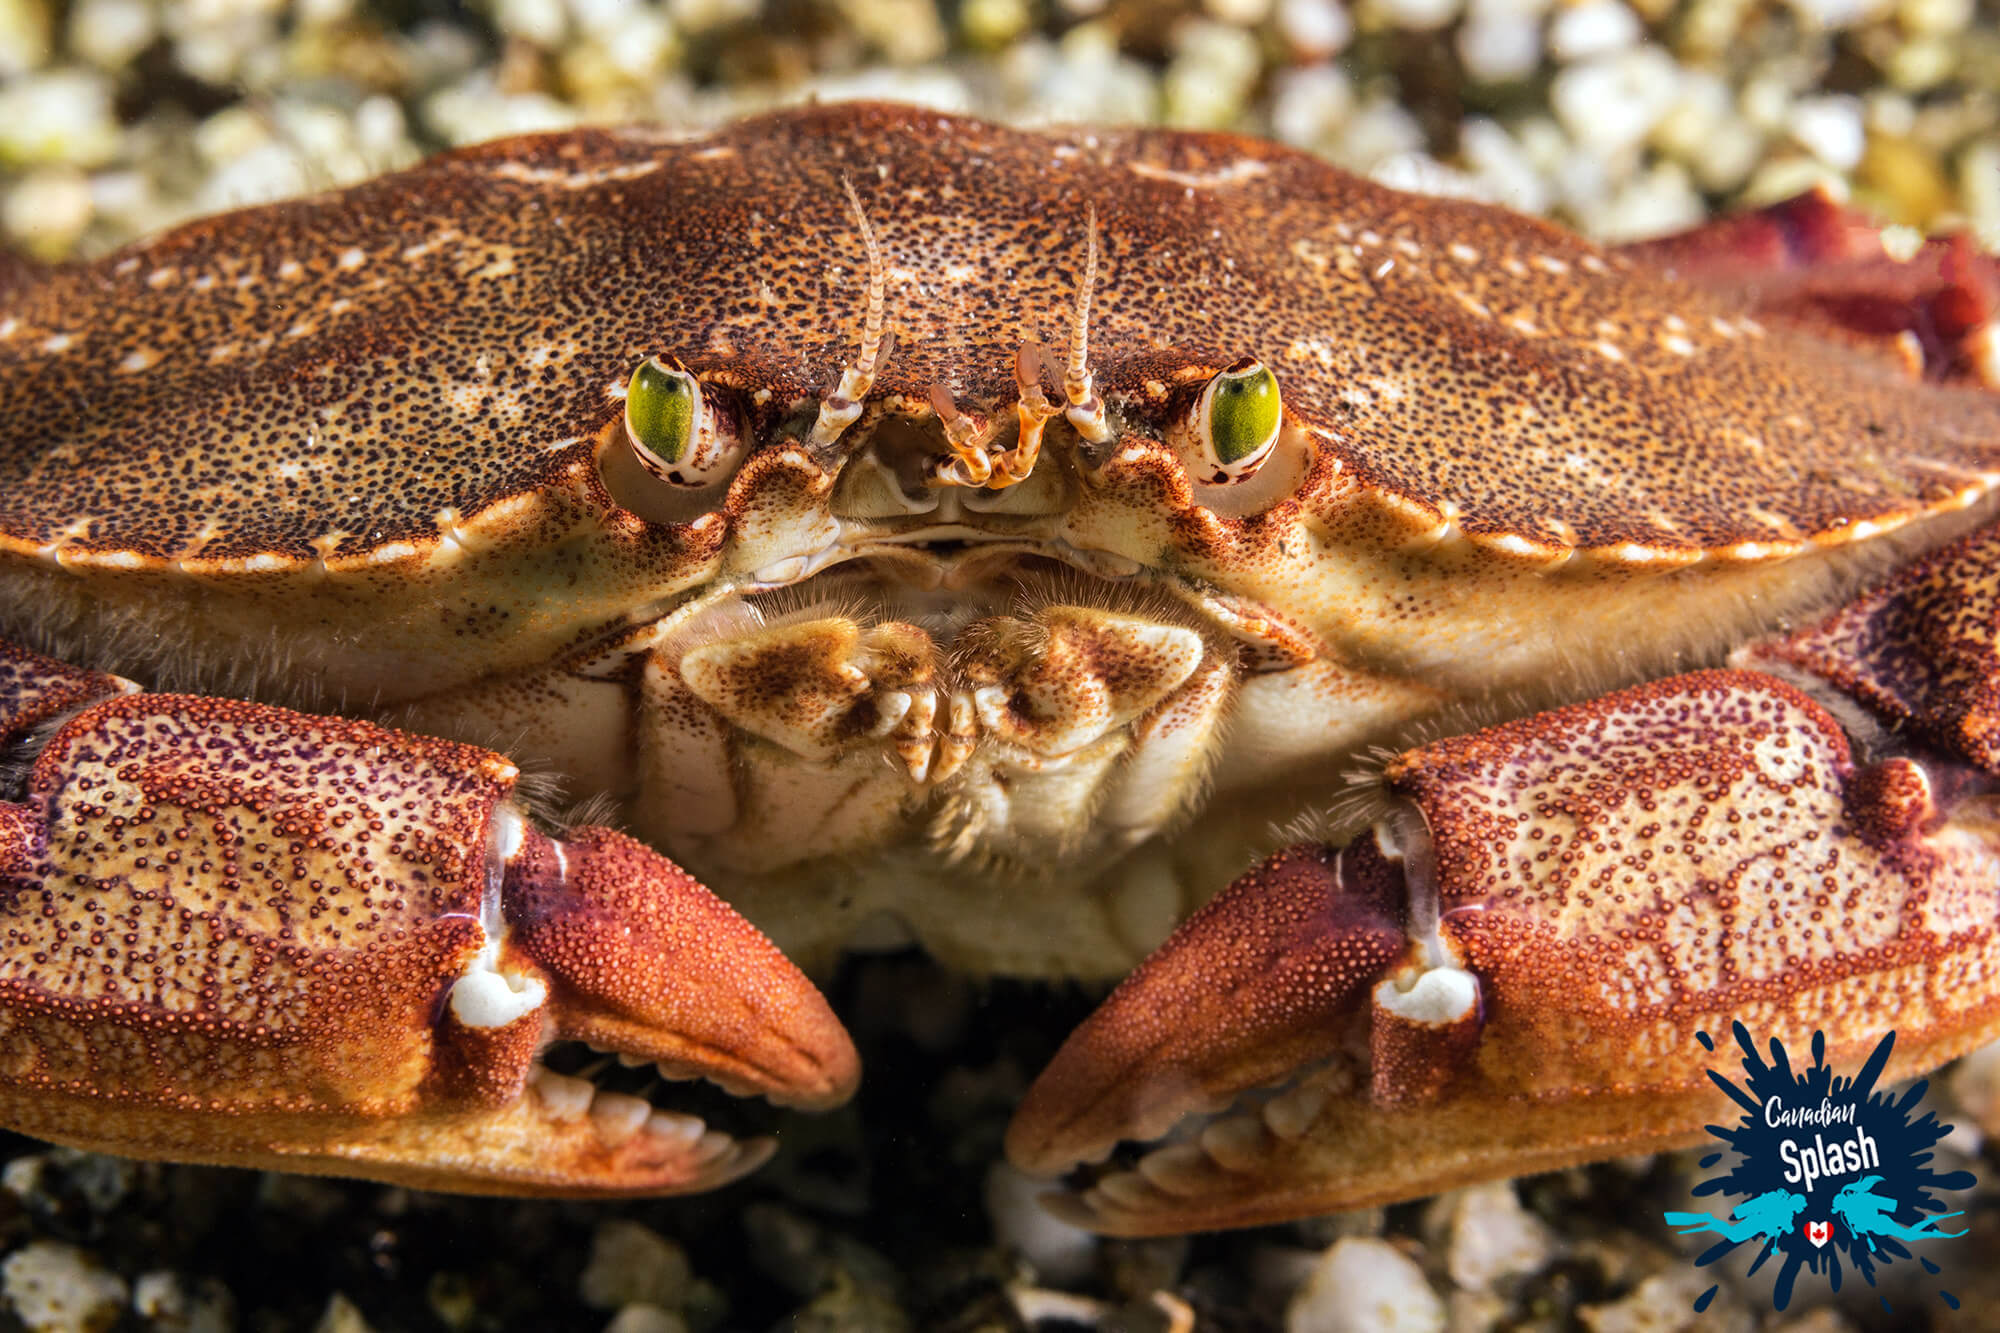 Diving with the Front Of A Rock Crab in Cranberry Cove, Outside of Halifax, Nova Scotia, Canada